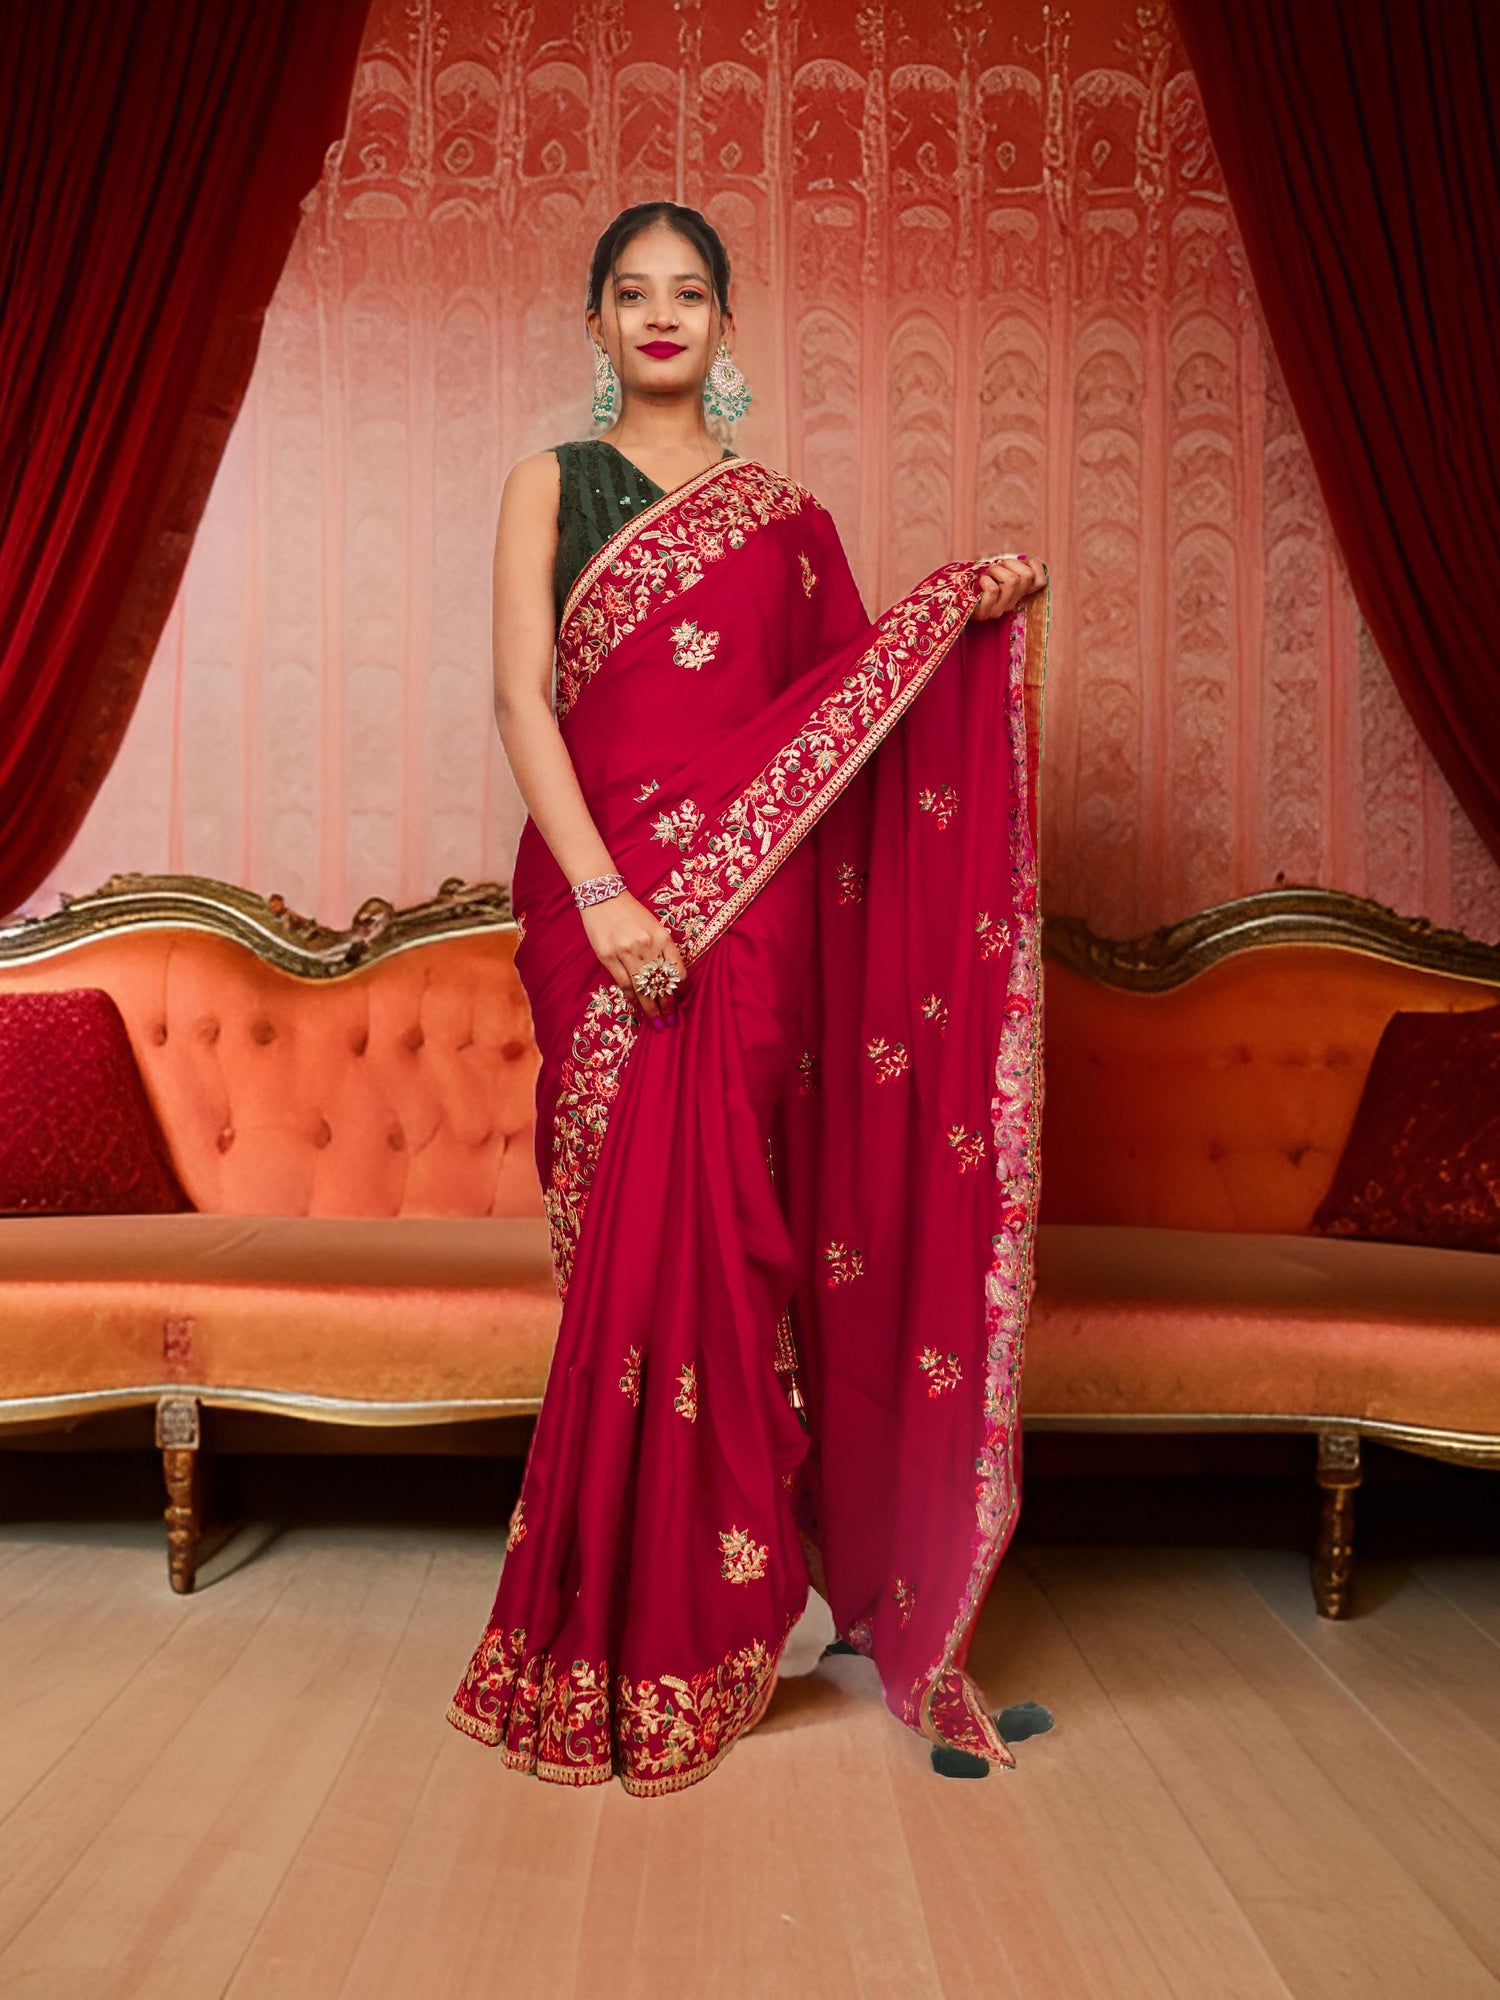 Designer Saree with Heavy embroidery Work by Shreekama Maroon Designer Sarees for Party Festival Wedding Occasion in Noida